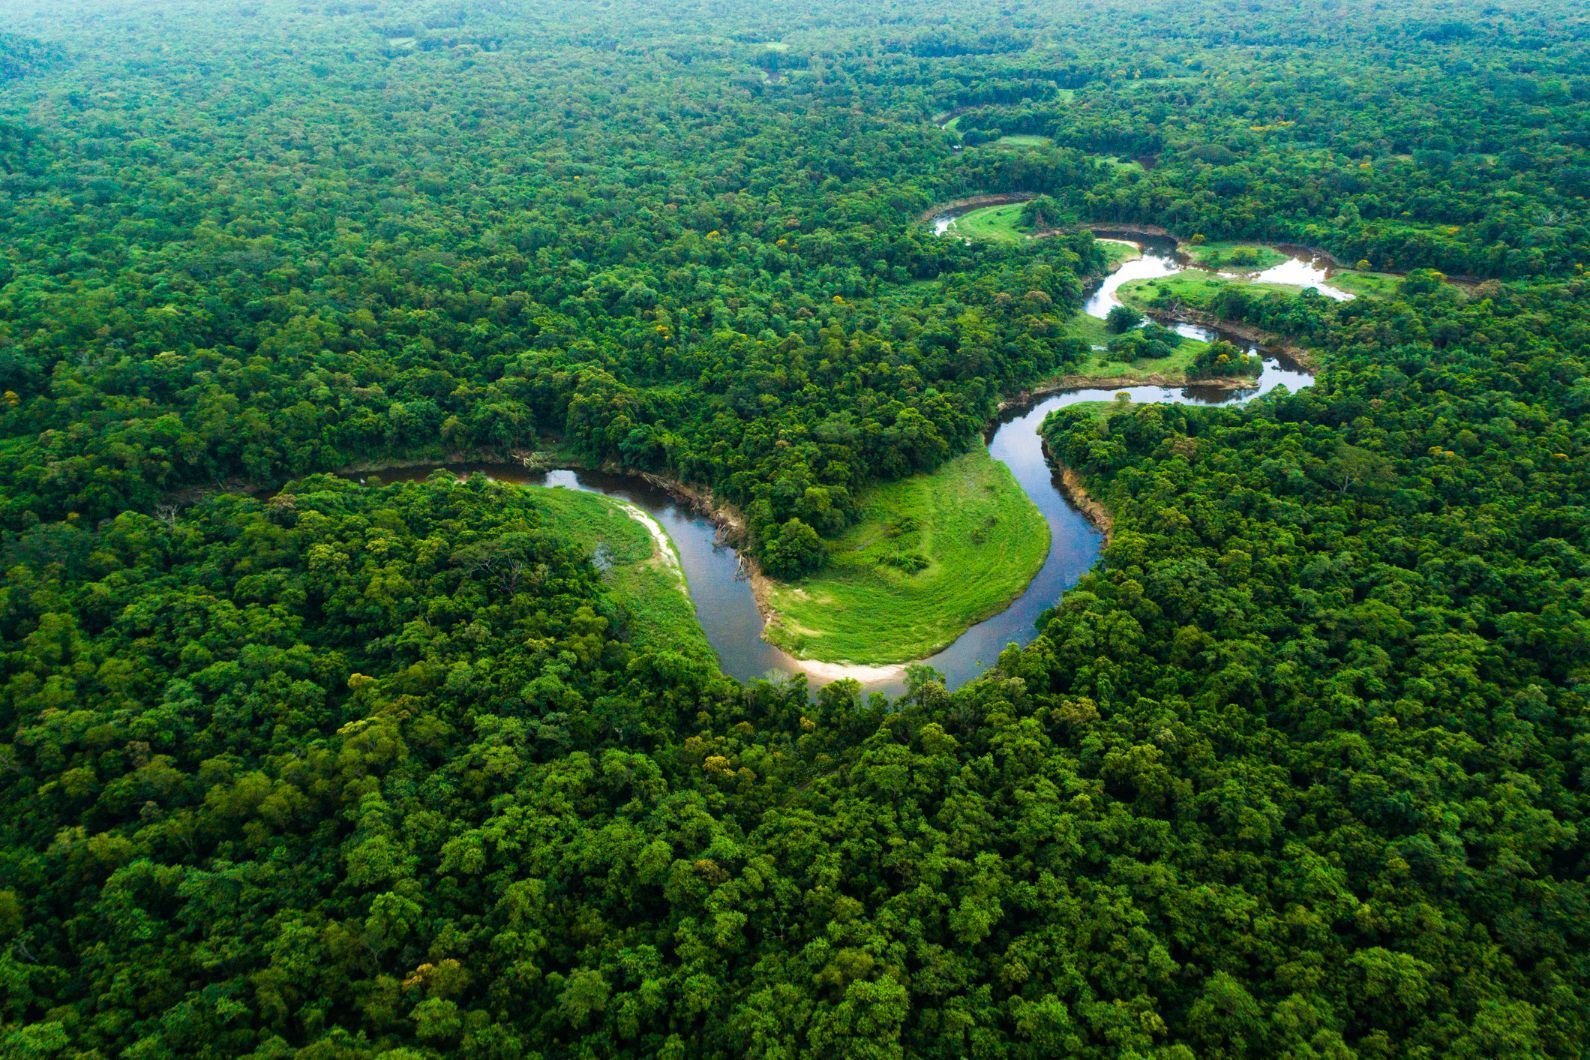 Brazil is the country most important in defining the future of the Amazon, the world's largest rainforest. Photo: Getty